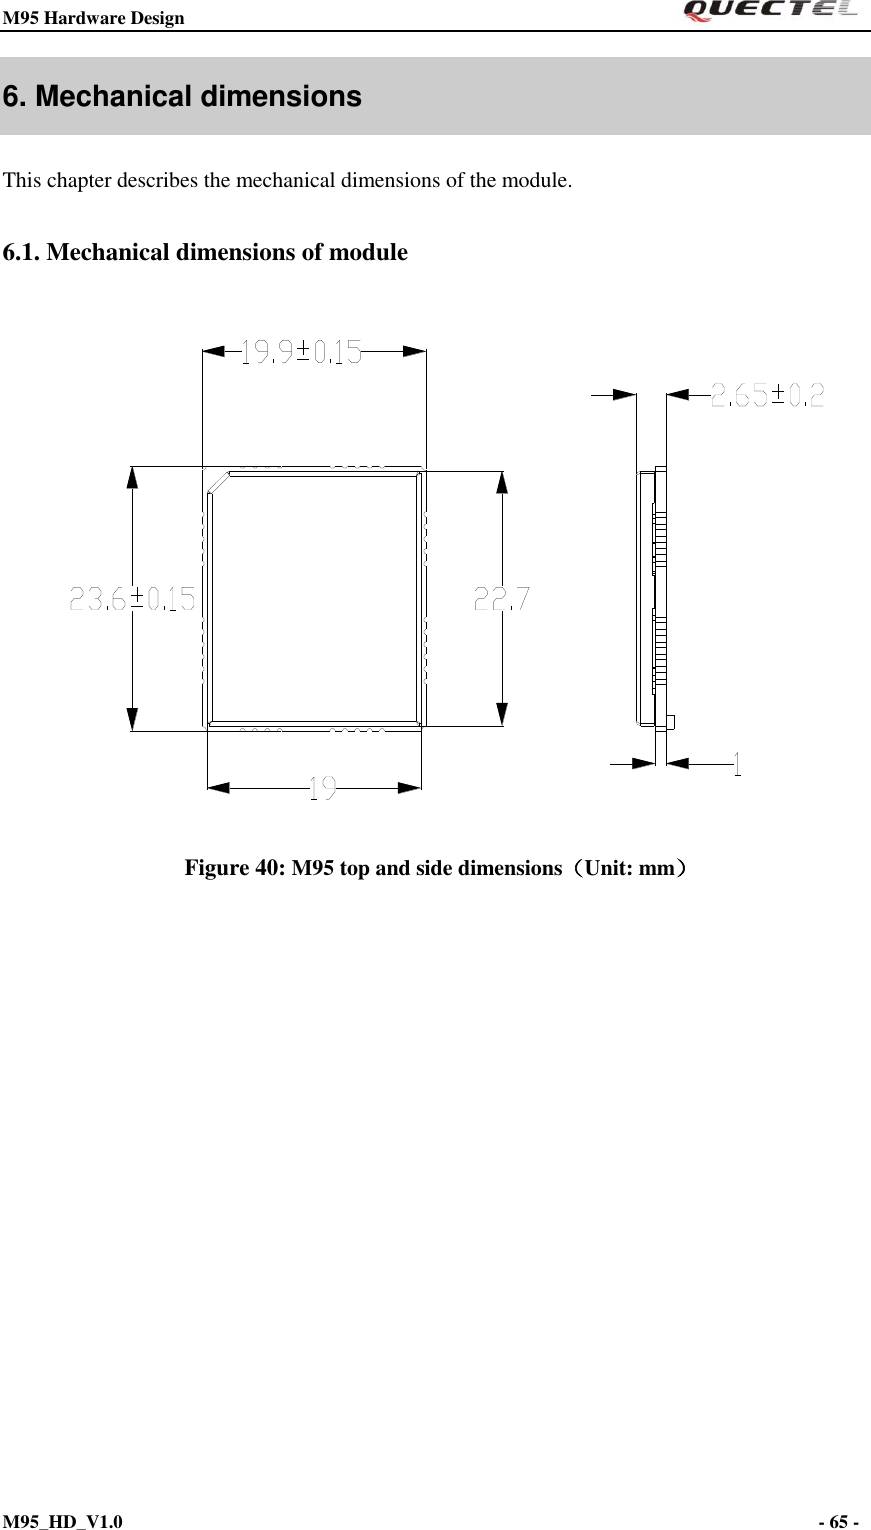 M95 Hardware Design                                                       M95_HD_V1.0                                                                - 65 -    6. Mechanical dimensions This chapter describes the mechanical dimensions of the module. 6.1. Mechanical dimensions of module    Figure 40: M95 top and side dimensions（Unit: mm） 